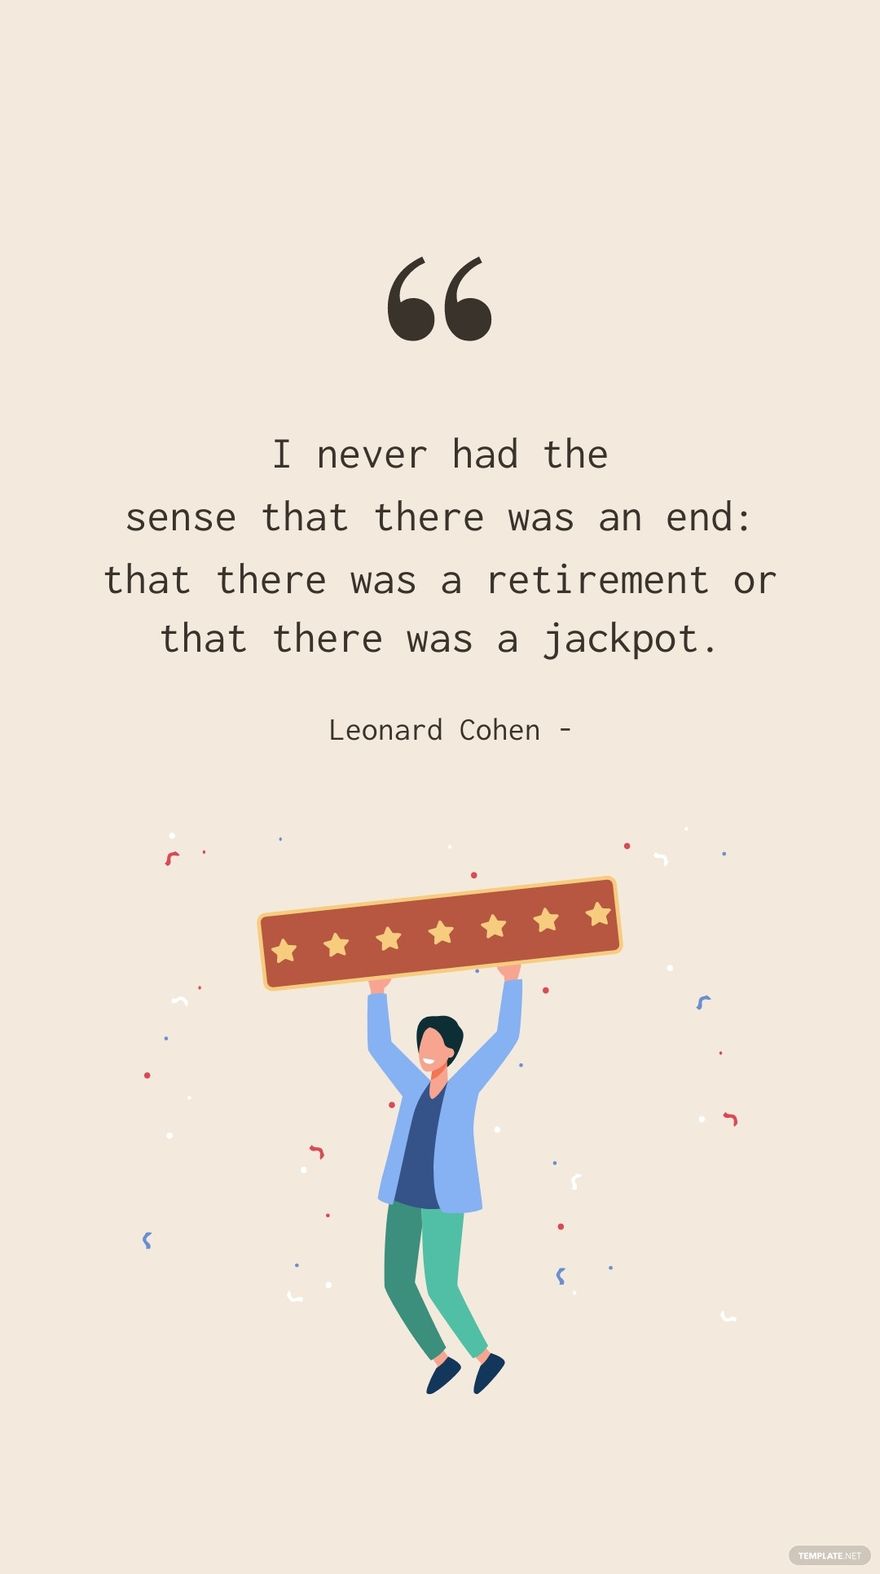 Leonard Cohen - I never had the sense that there was an end: that there was a retirement or that there was a jackpot.